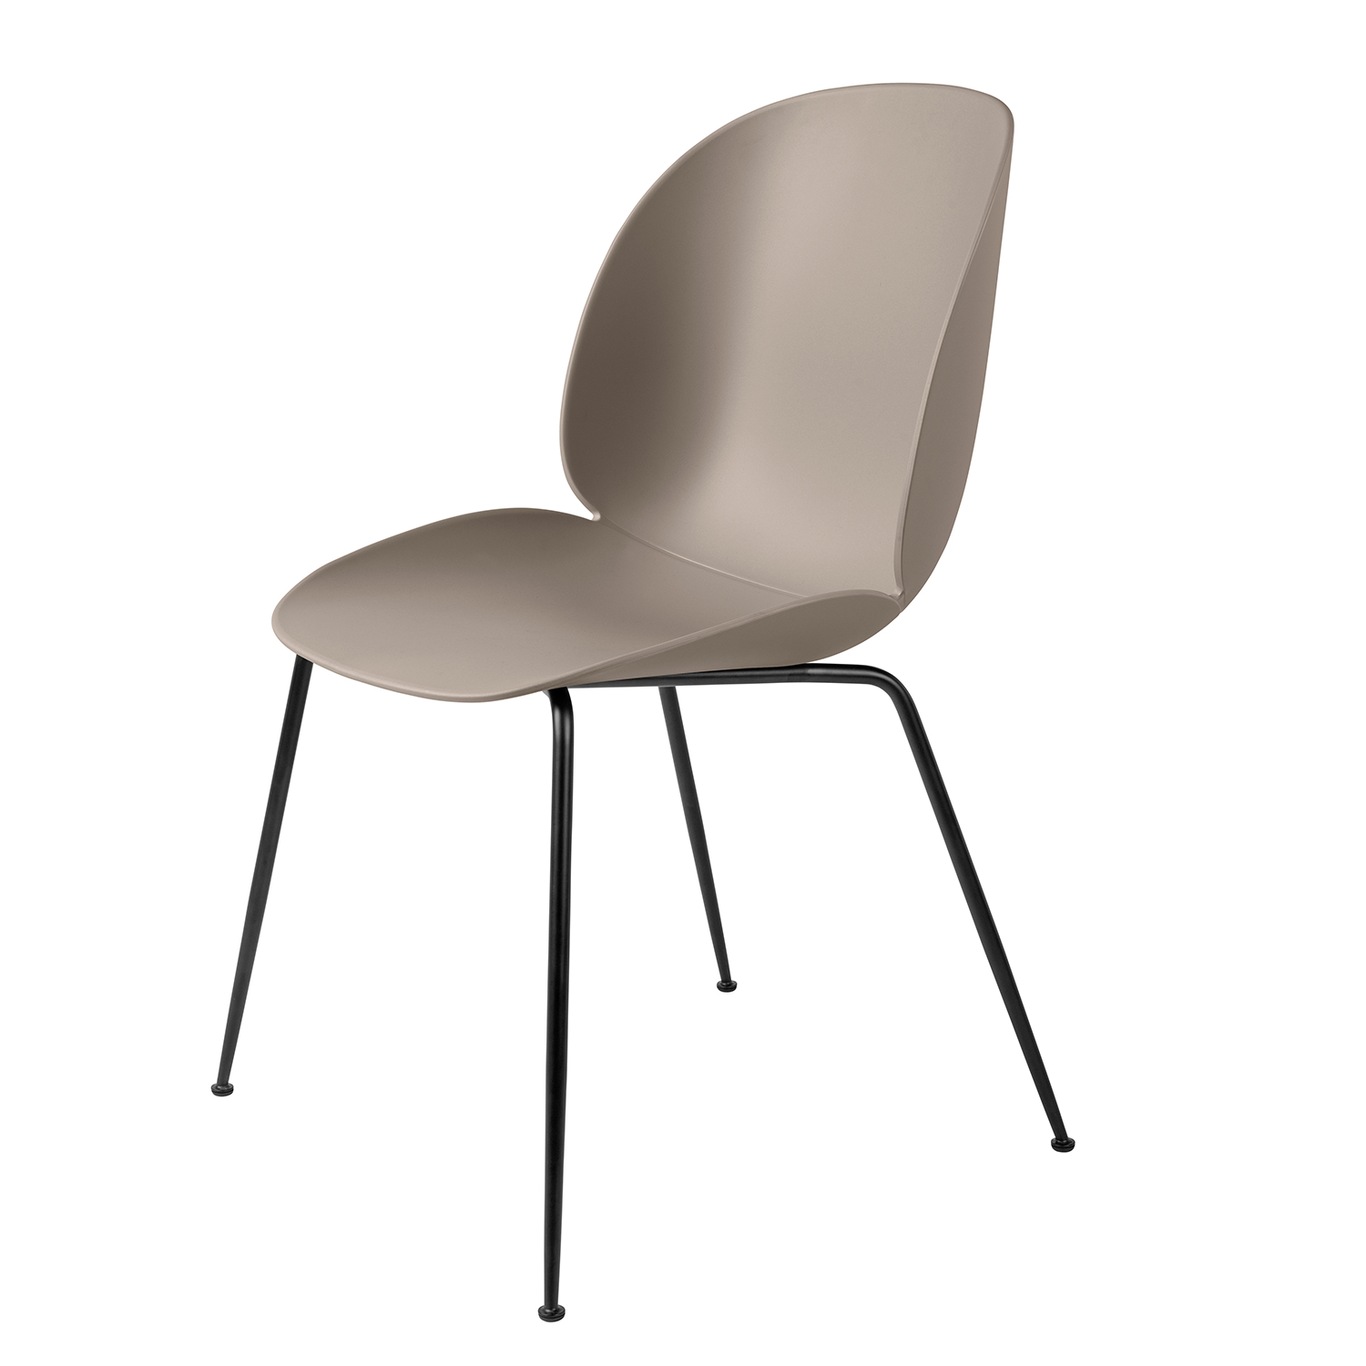 Beetle Dining Chair Un-upholstered, Conic Base Black, New Beige